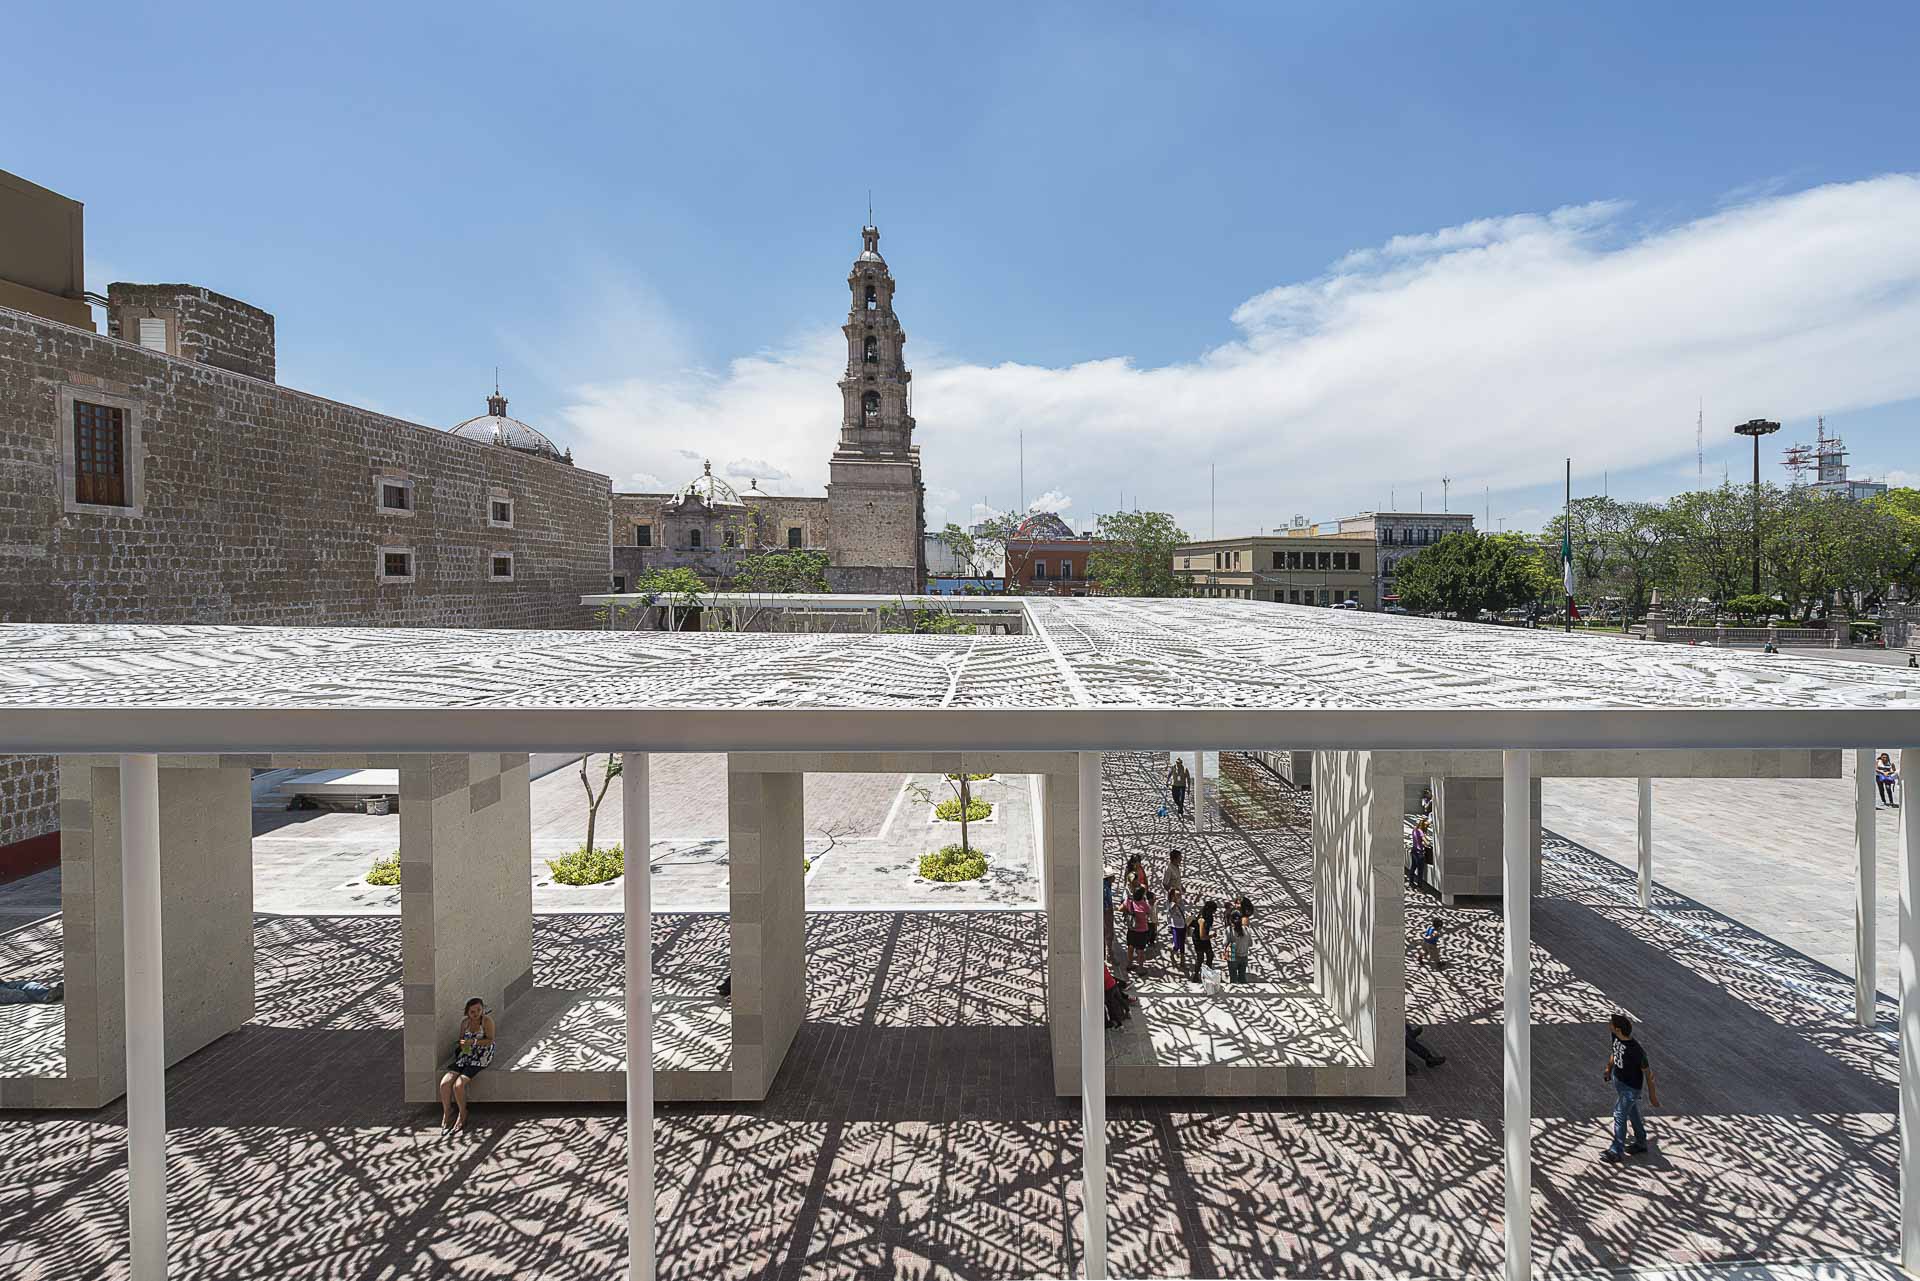 Perforated metal canopy casts shadows at Aguascalientes, Mexico.